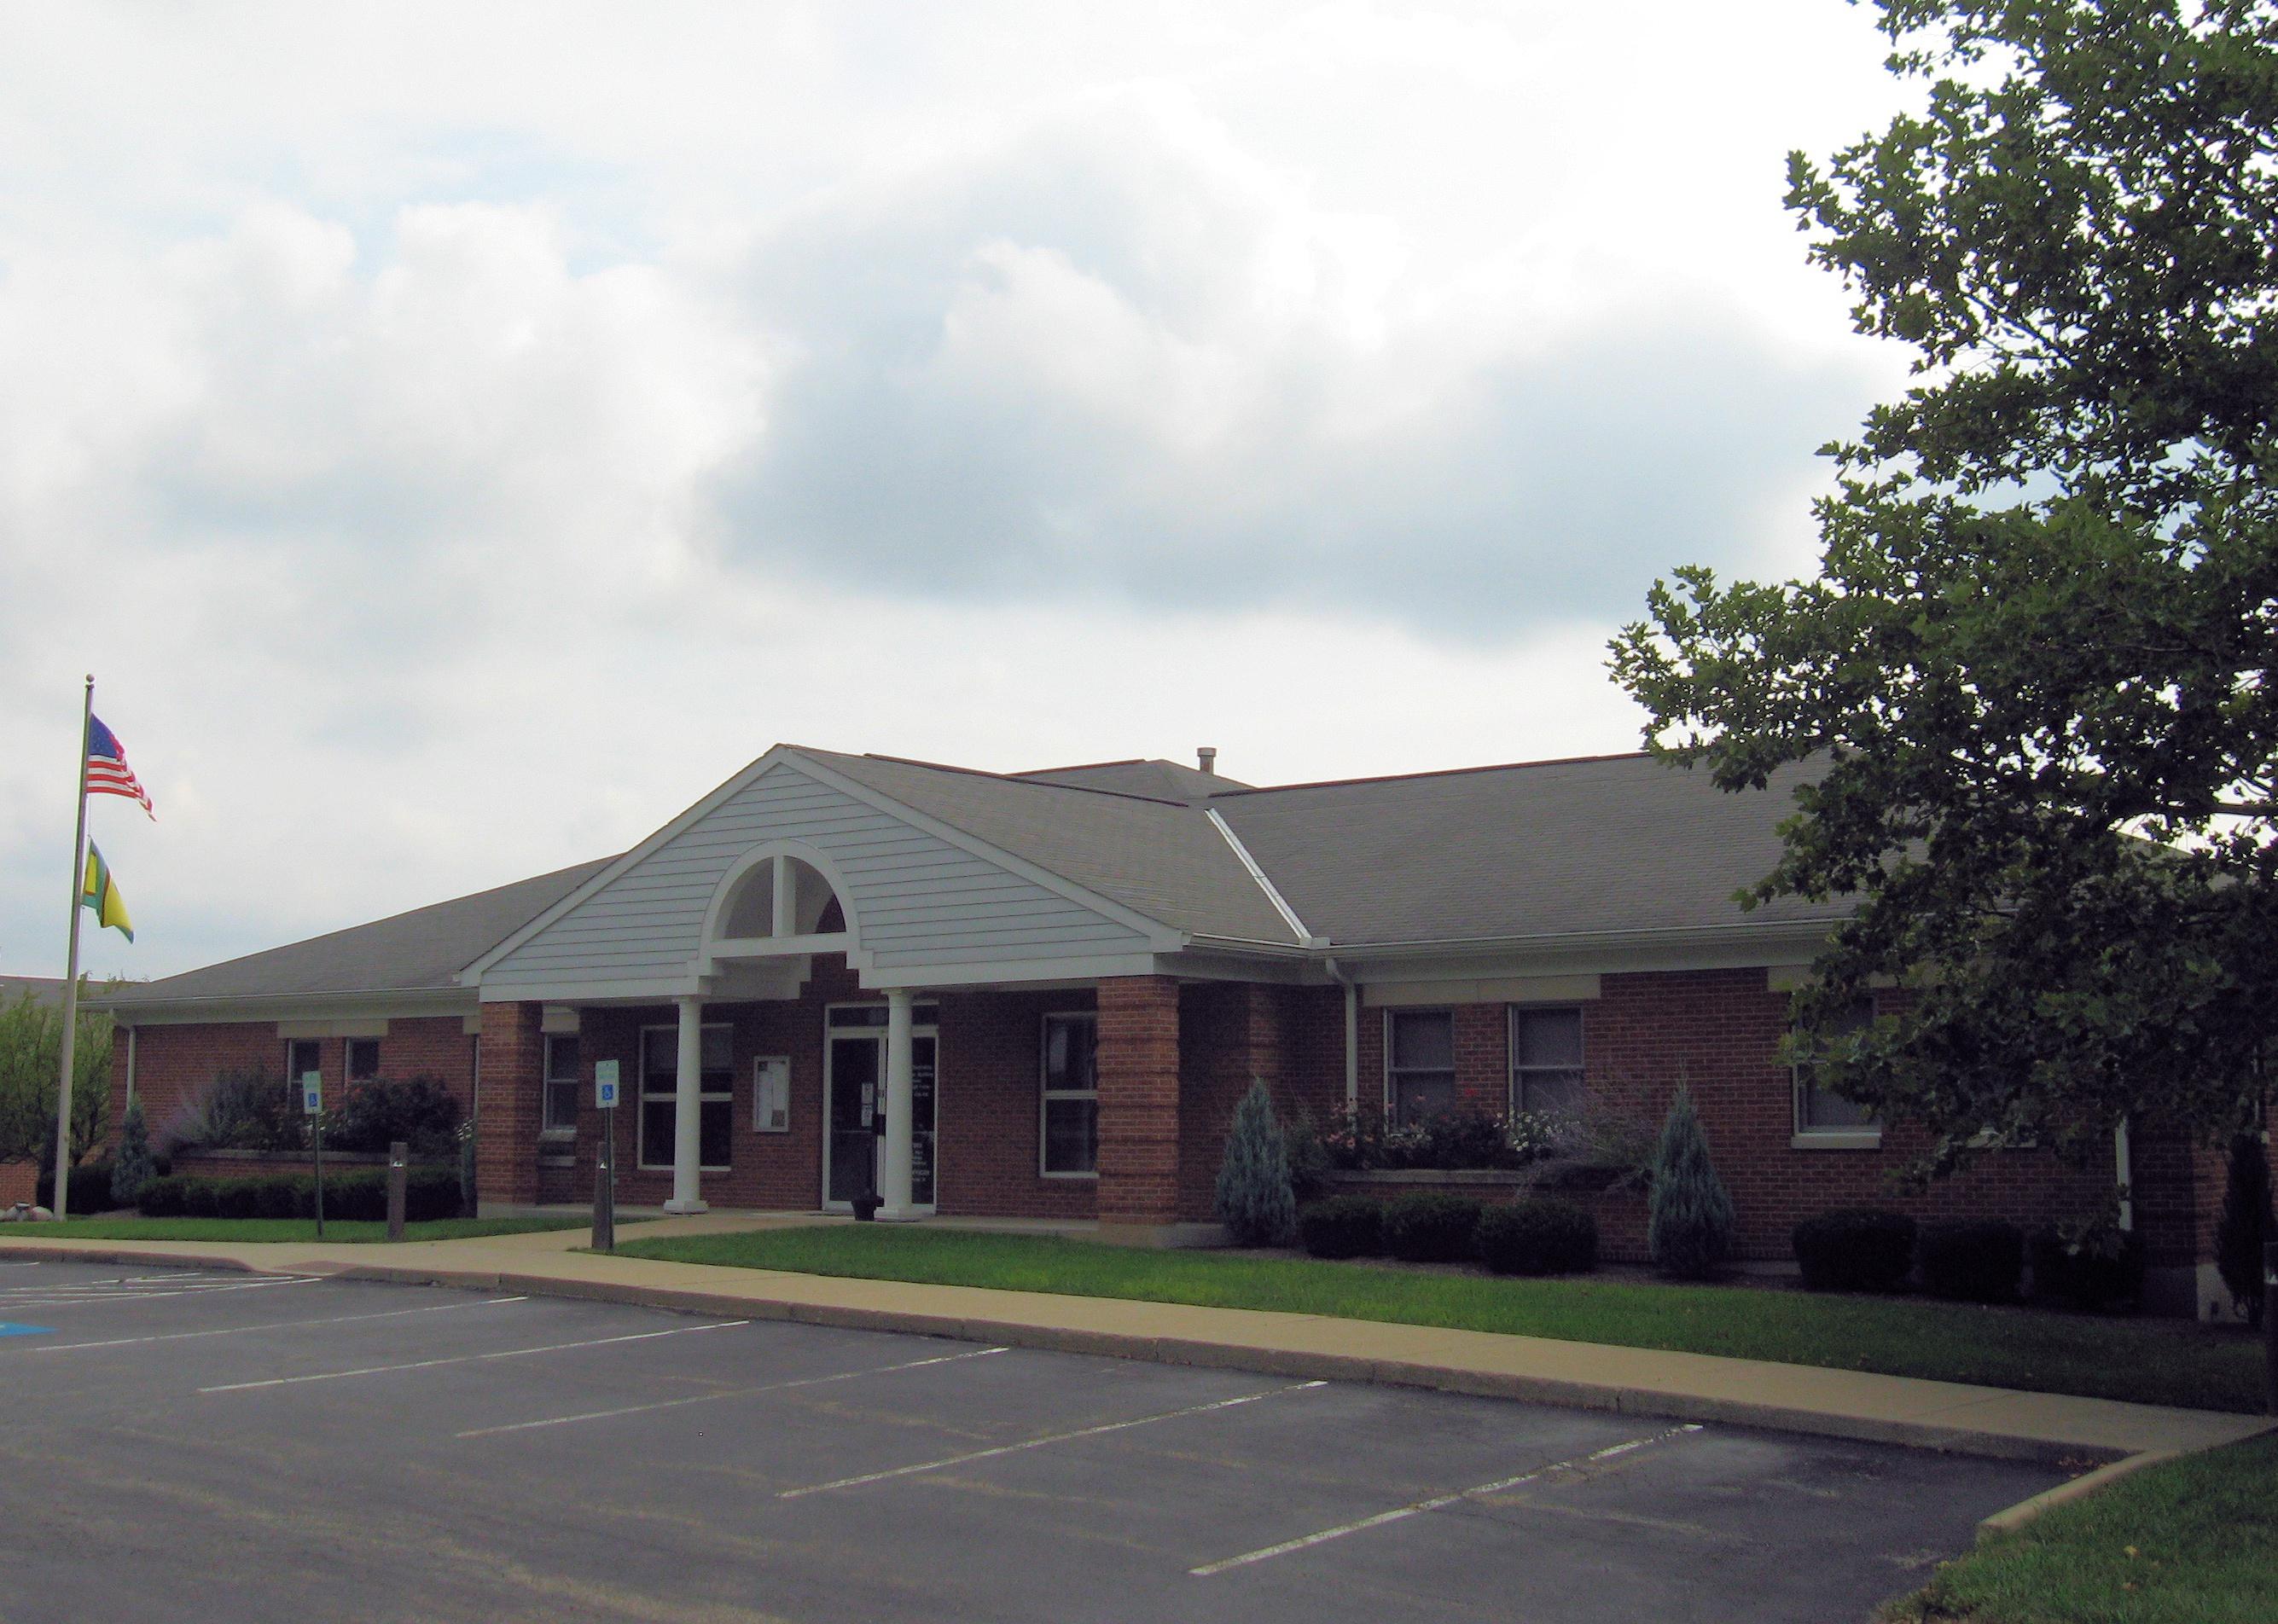 View of township government building.